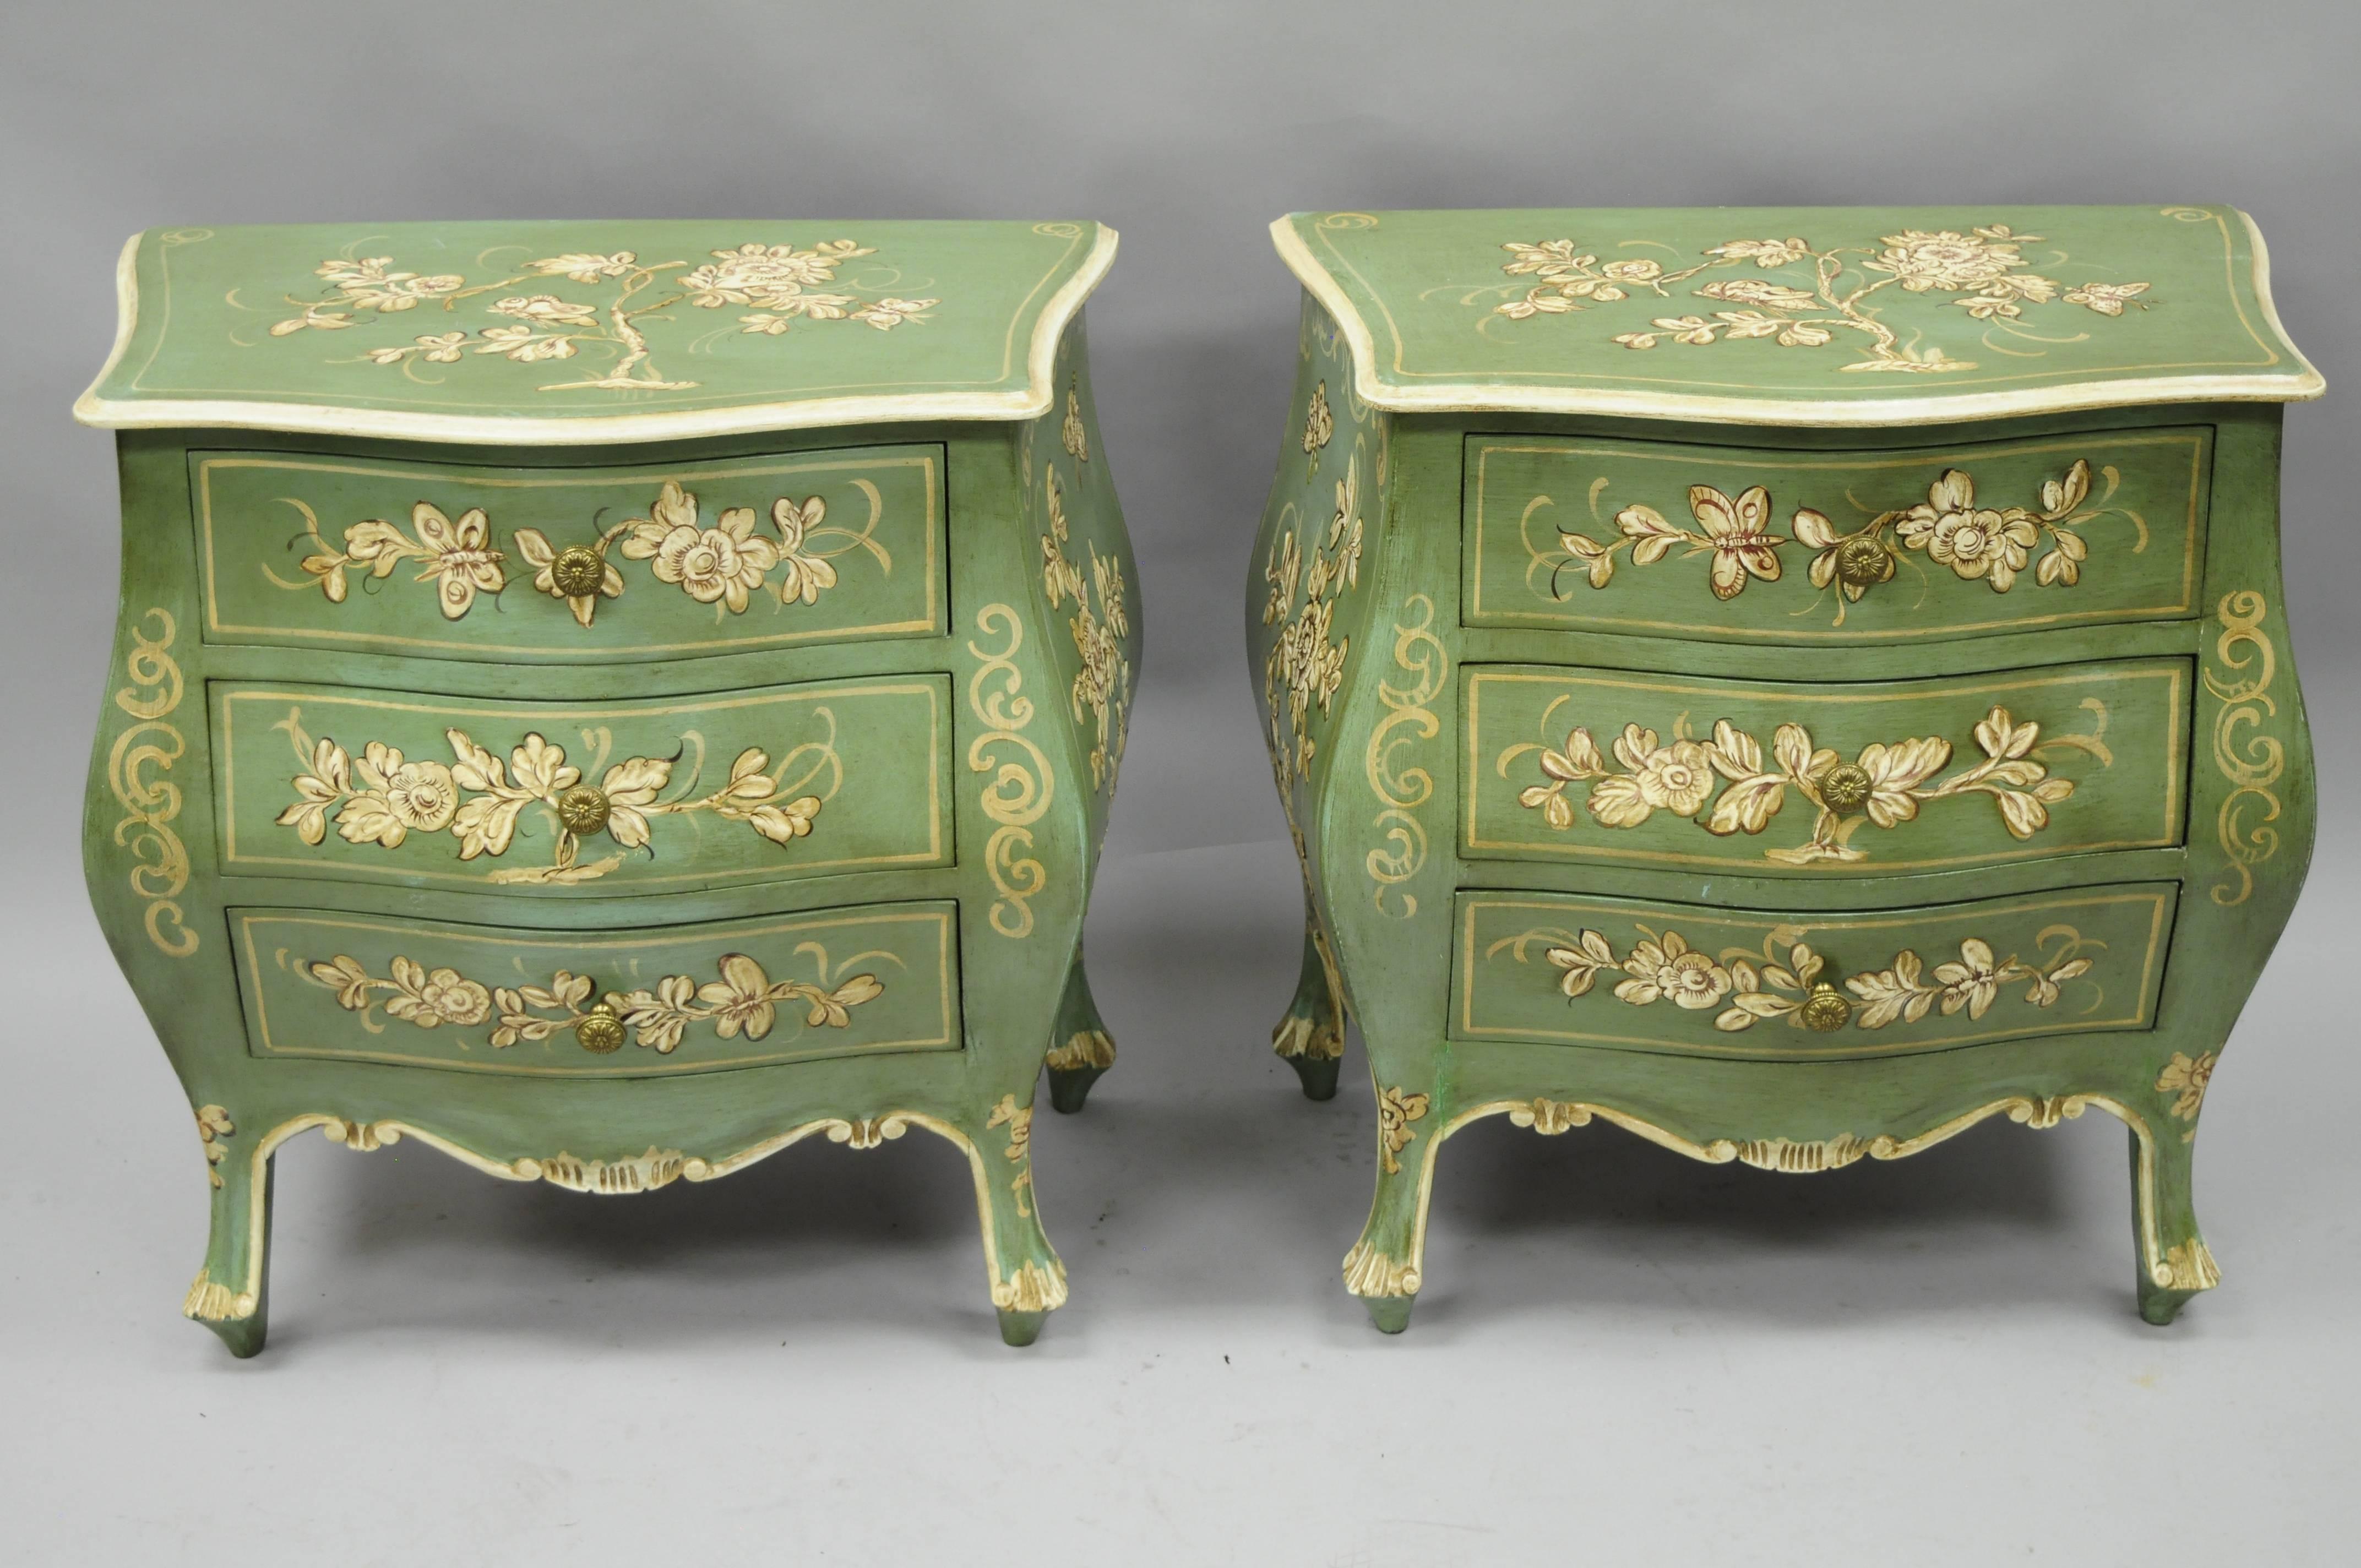 Pair of vintage petite Italian Florentine / Venetian green painted bombe commodes / bedside tables. This adorable pair of tables features an antiqued green painted finish with raised floral details to the face, sides, and tops. Chests further